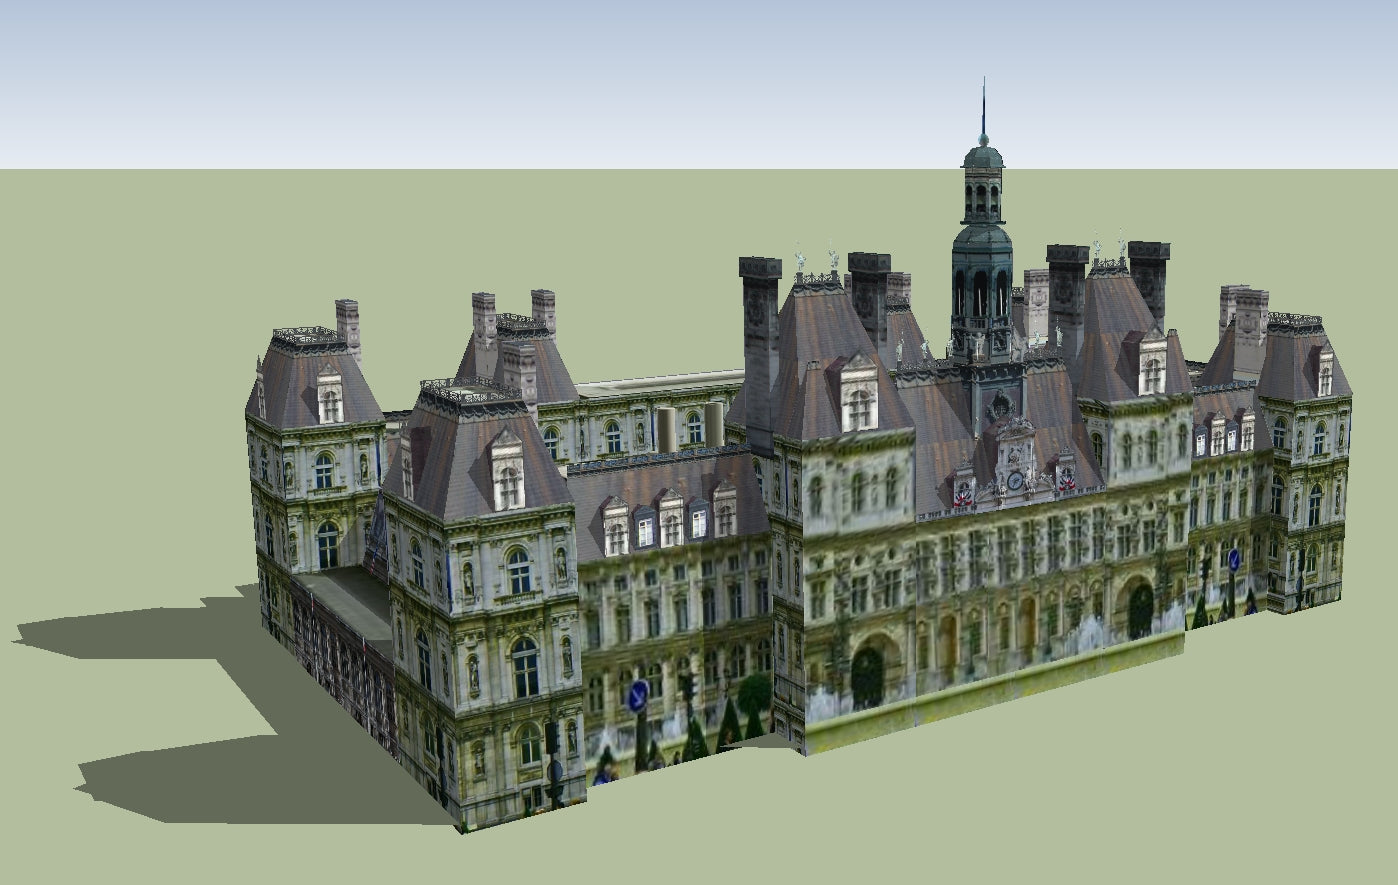 💎【Sketchup Architecture 3D Projects】European Classical Architecture Sketchup 3D Models V2